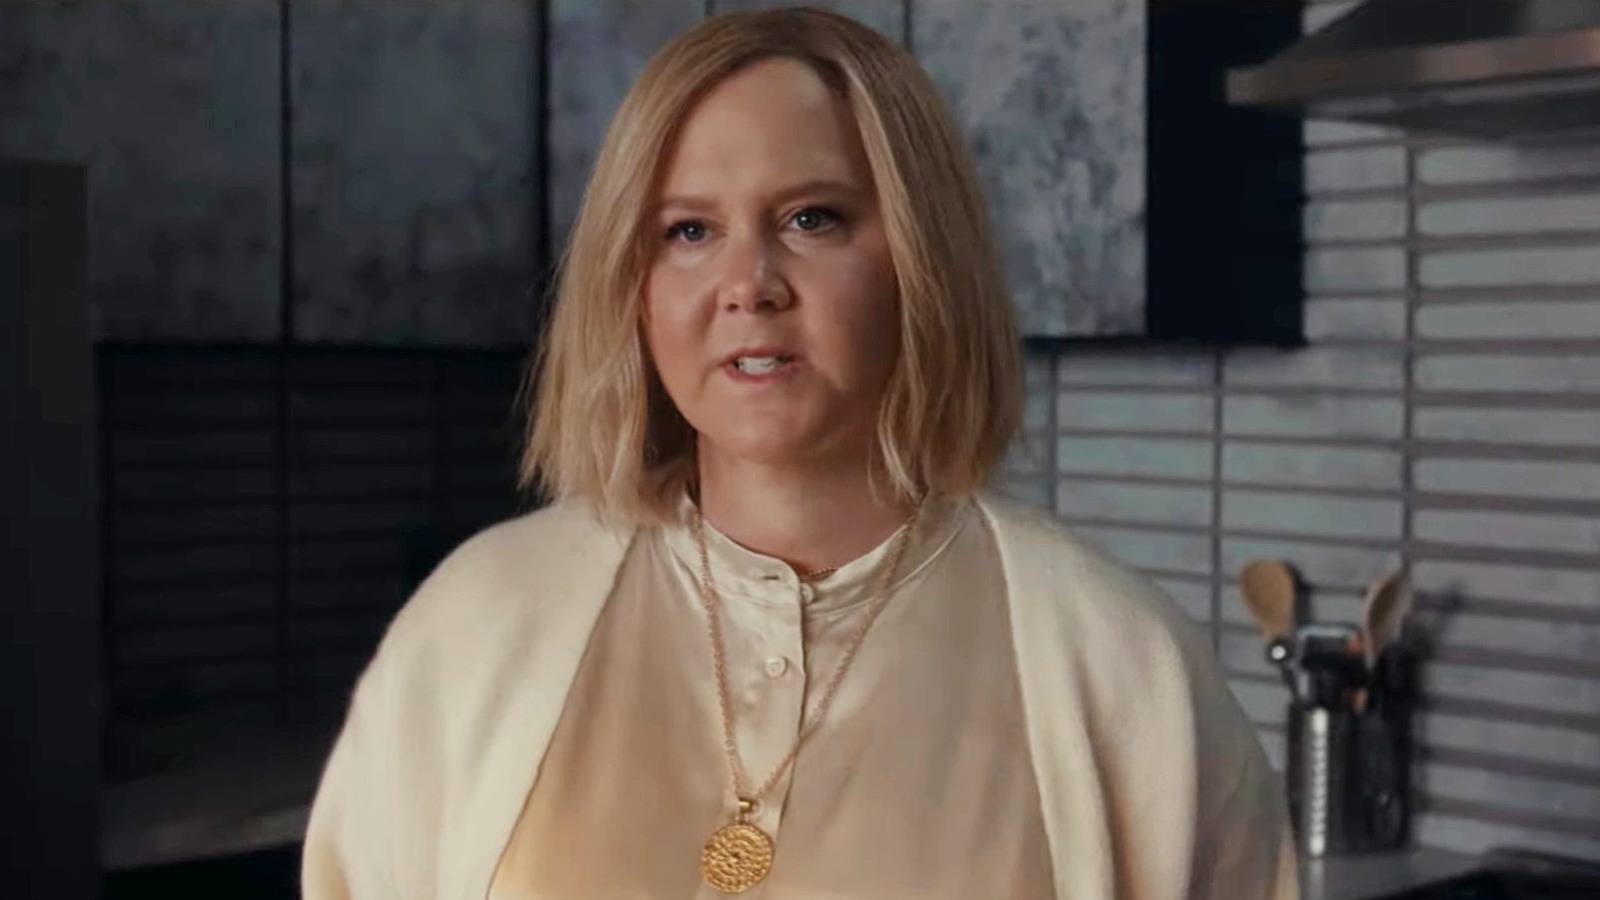 Saturday Night Live exposes Amy Schumer's weird time habits in Watcher parody